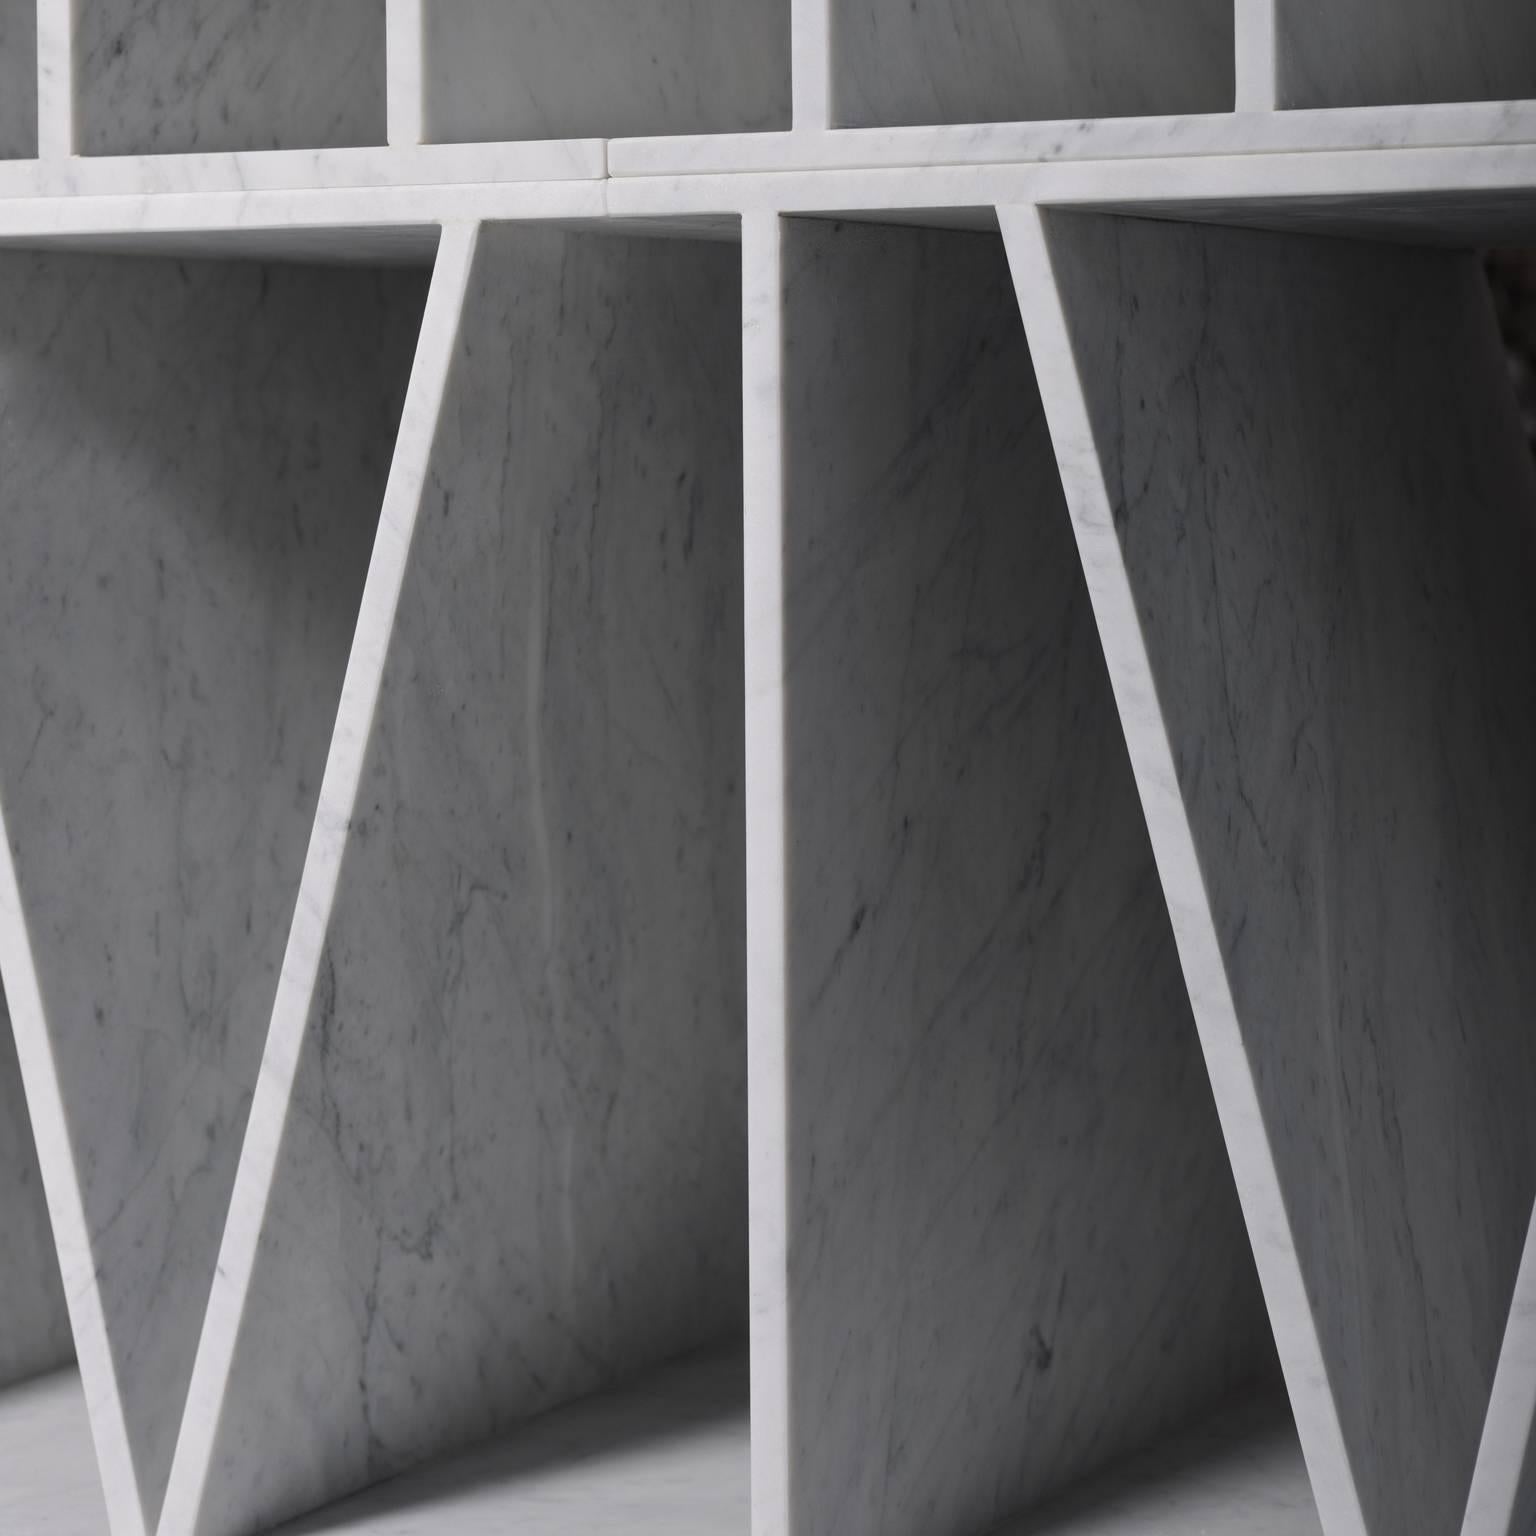 Modular bookcase made of white Carrara marble, in the shape of the Roman numerals from I-IV. The overlapping and juxtaposition of these modules simultaneously creates the structure and symbolic form of each bookcase. Designed by Paolo Ullian and